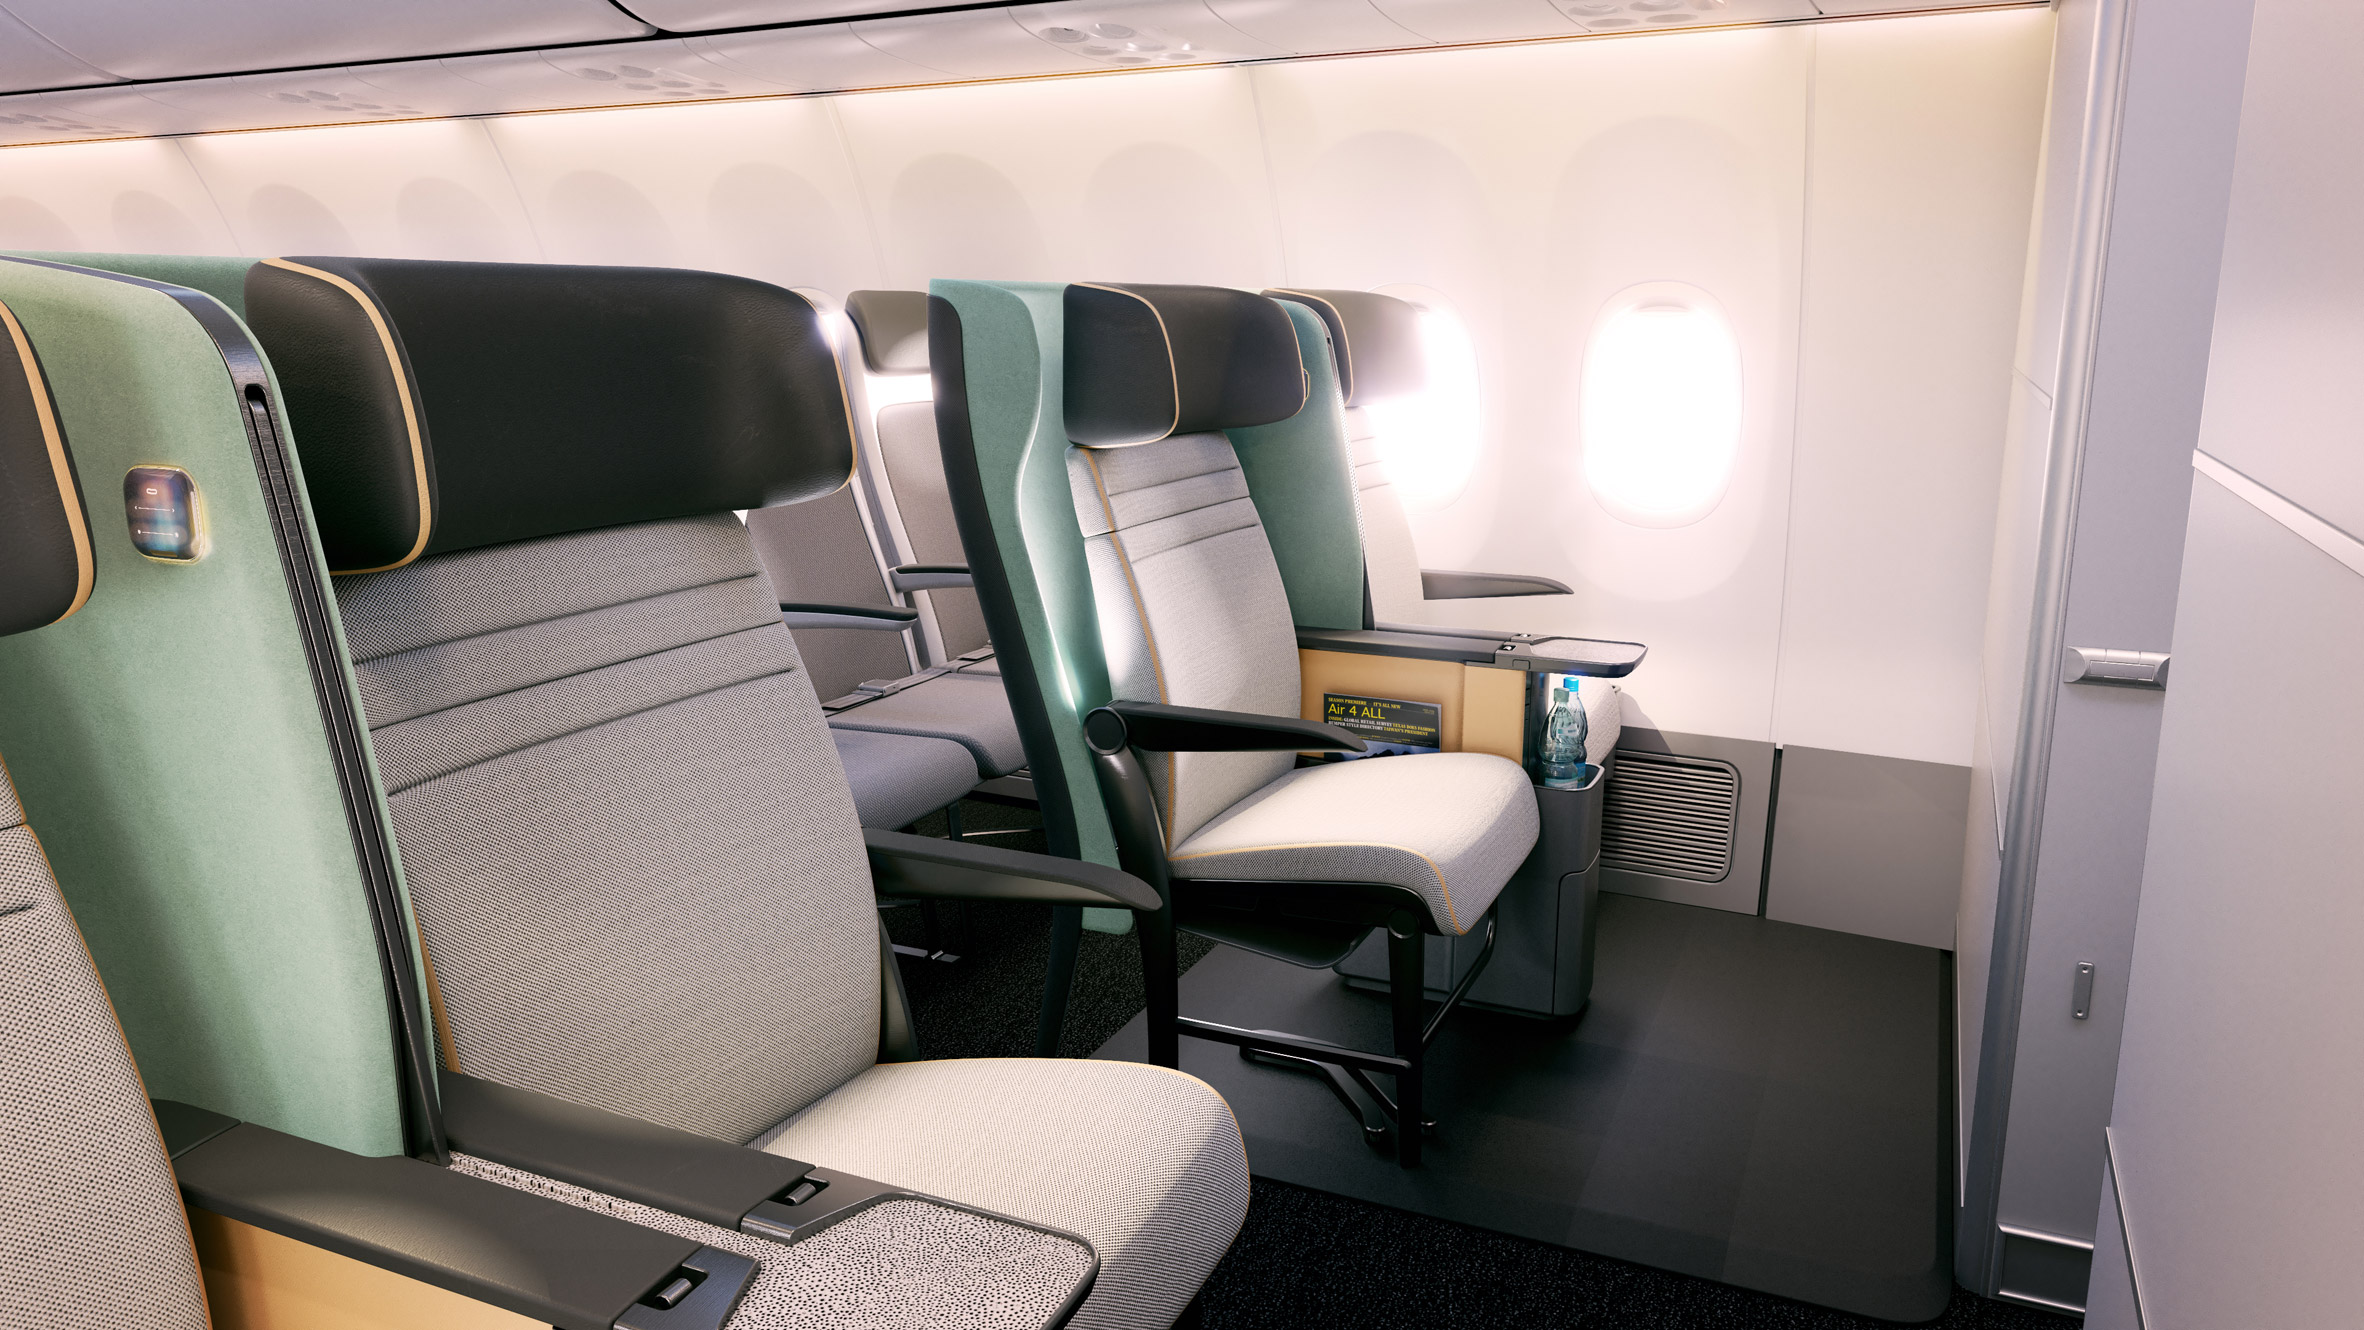 Air 4 All concept airline seating with the seat down in a standard position